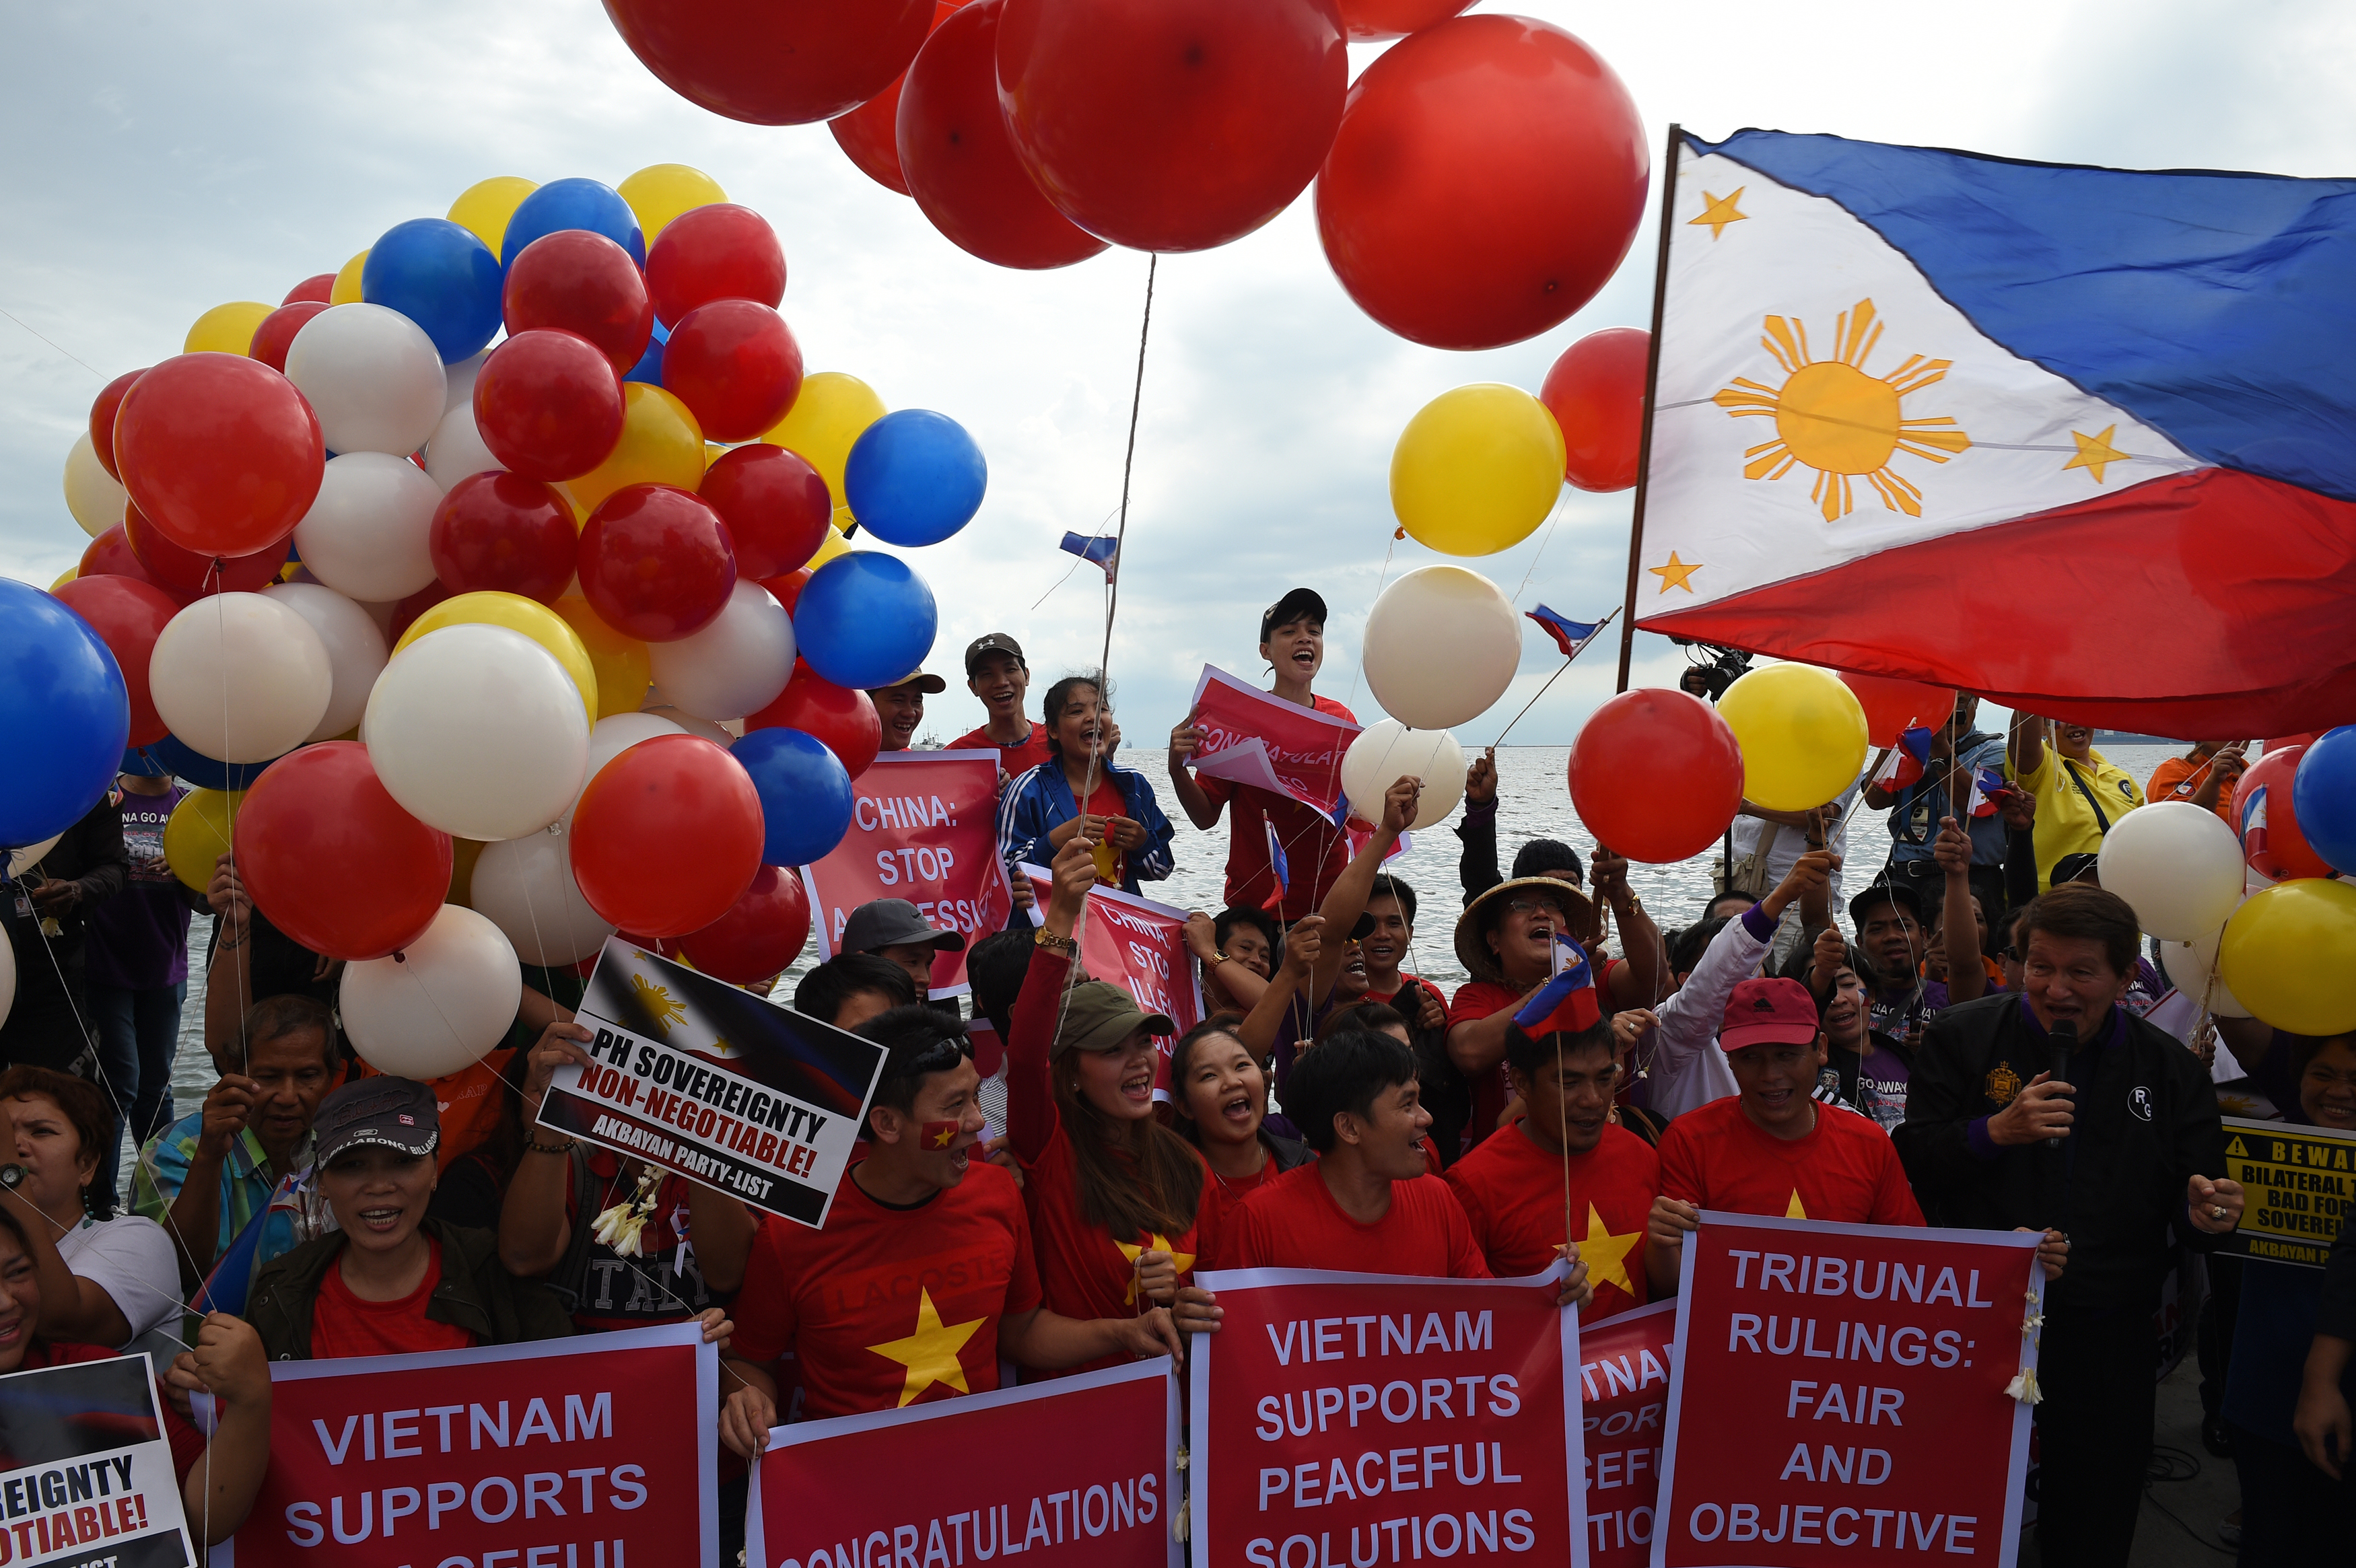 Filipino activists and Vietnamese nationals release balloons and wave Philippine flags as they anticipate a favourable decision from a UN tribunal ruling on the legality of China's claims to an area of the South China sea contested by the Philippines, during a demonstration along the bay walk in Roxas Boulevard in Manila on July 12, 2016. The Philippines welcomes a ruling by a UN-backed tribunal on July 12 that declares China has no "historic rights" in the South China Sea, Foreign Secretary Perfecto Yasay said, as he urged restraint.  / AFP PHOTO / TED ALJIBE